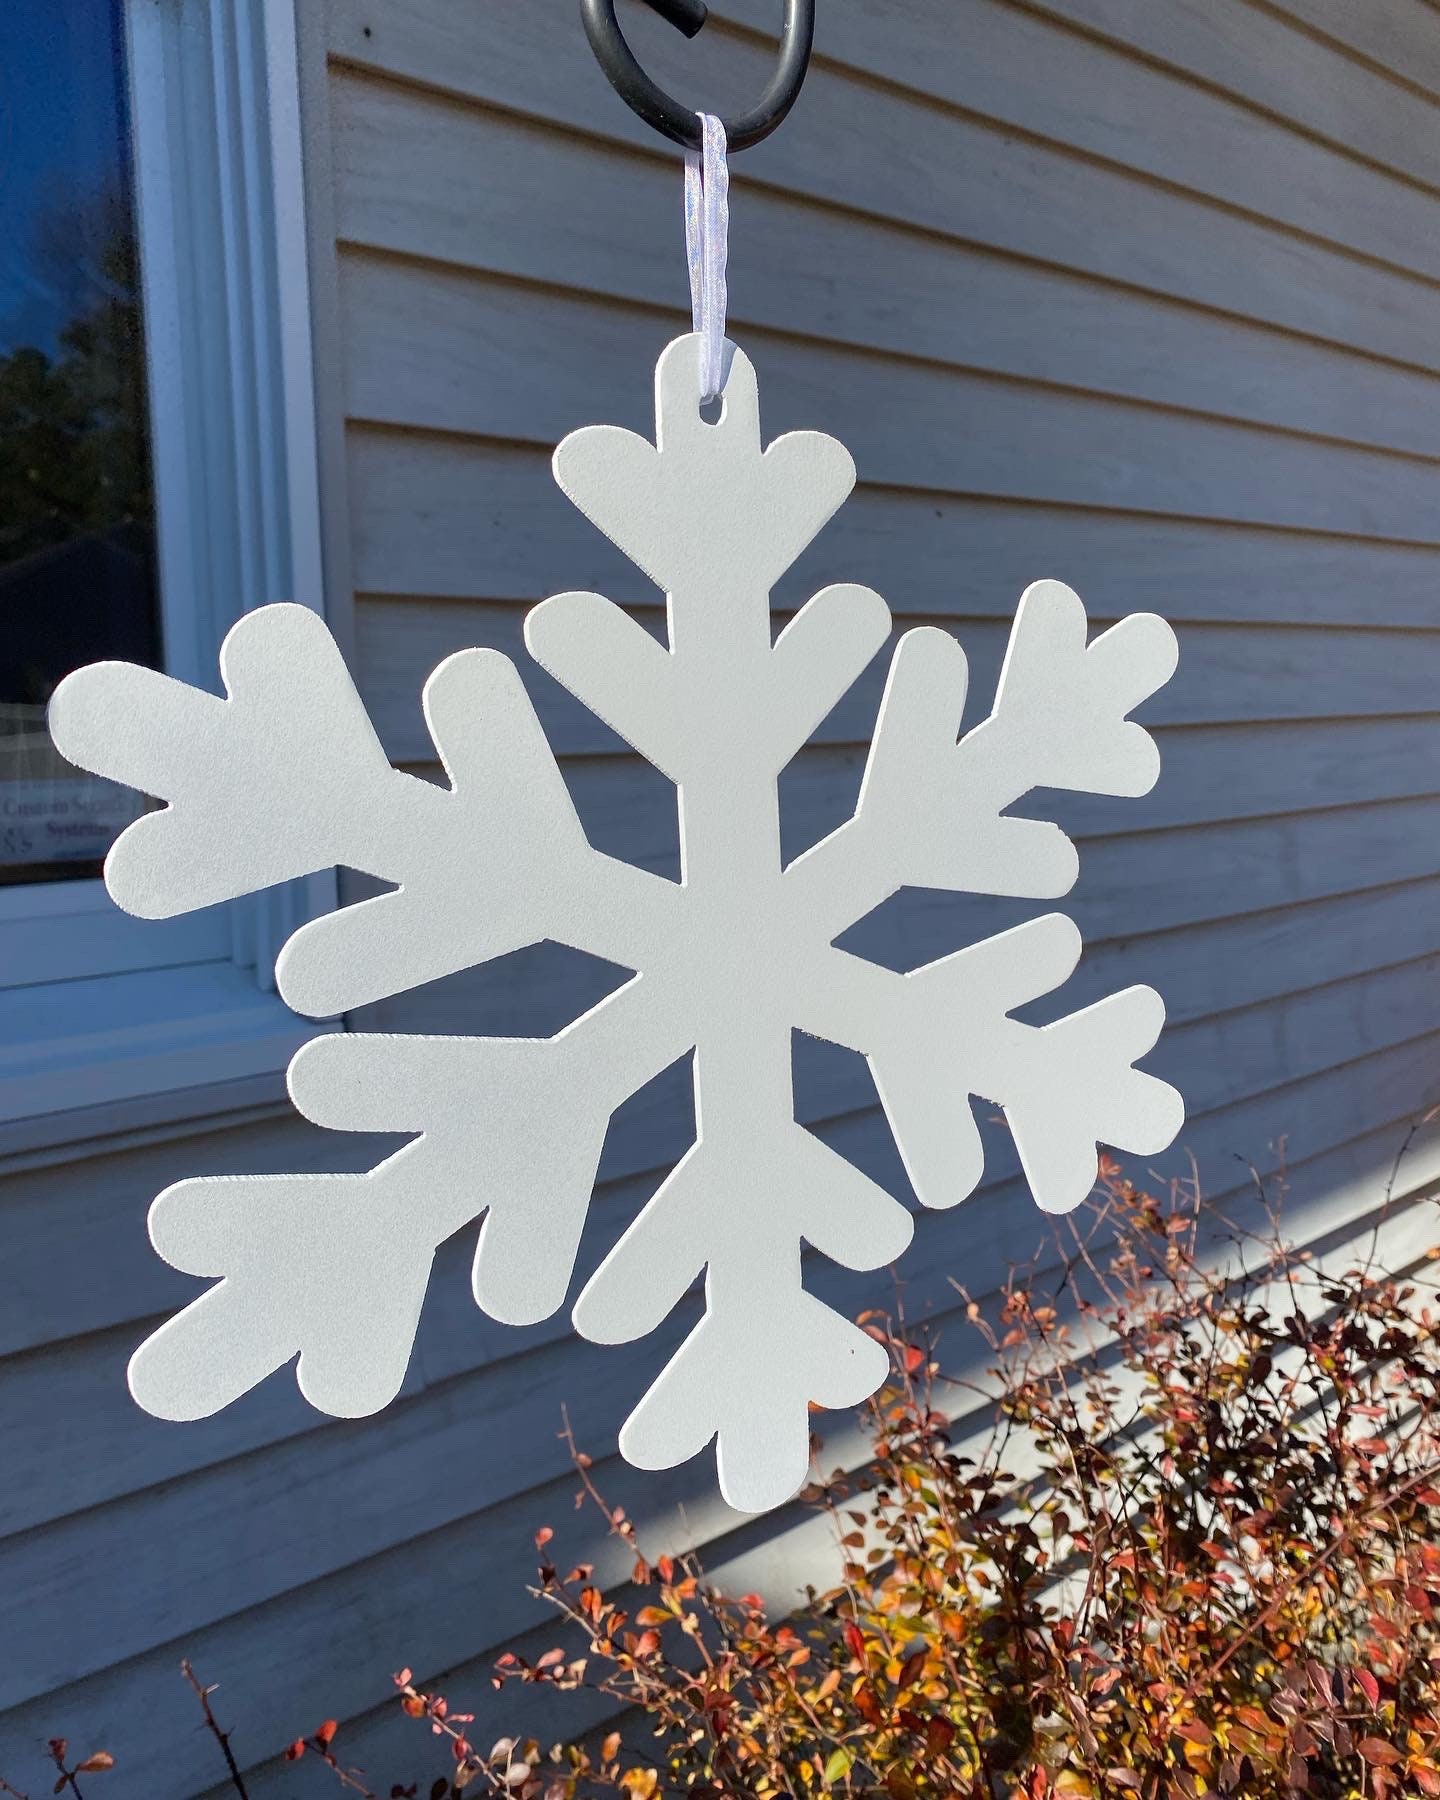 Set of 3 Extra Large 16 Inch Hanging Snowflakes Decorations, 3d Printed,  Durable Plastic Ornament Decor Christmas Winter 